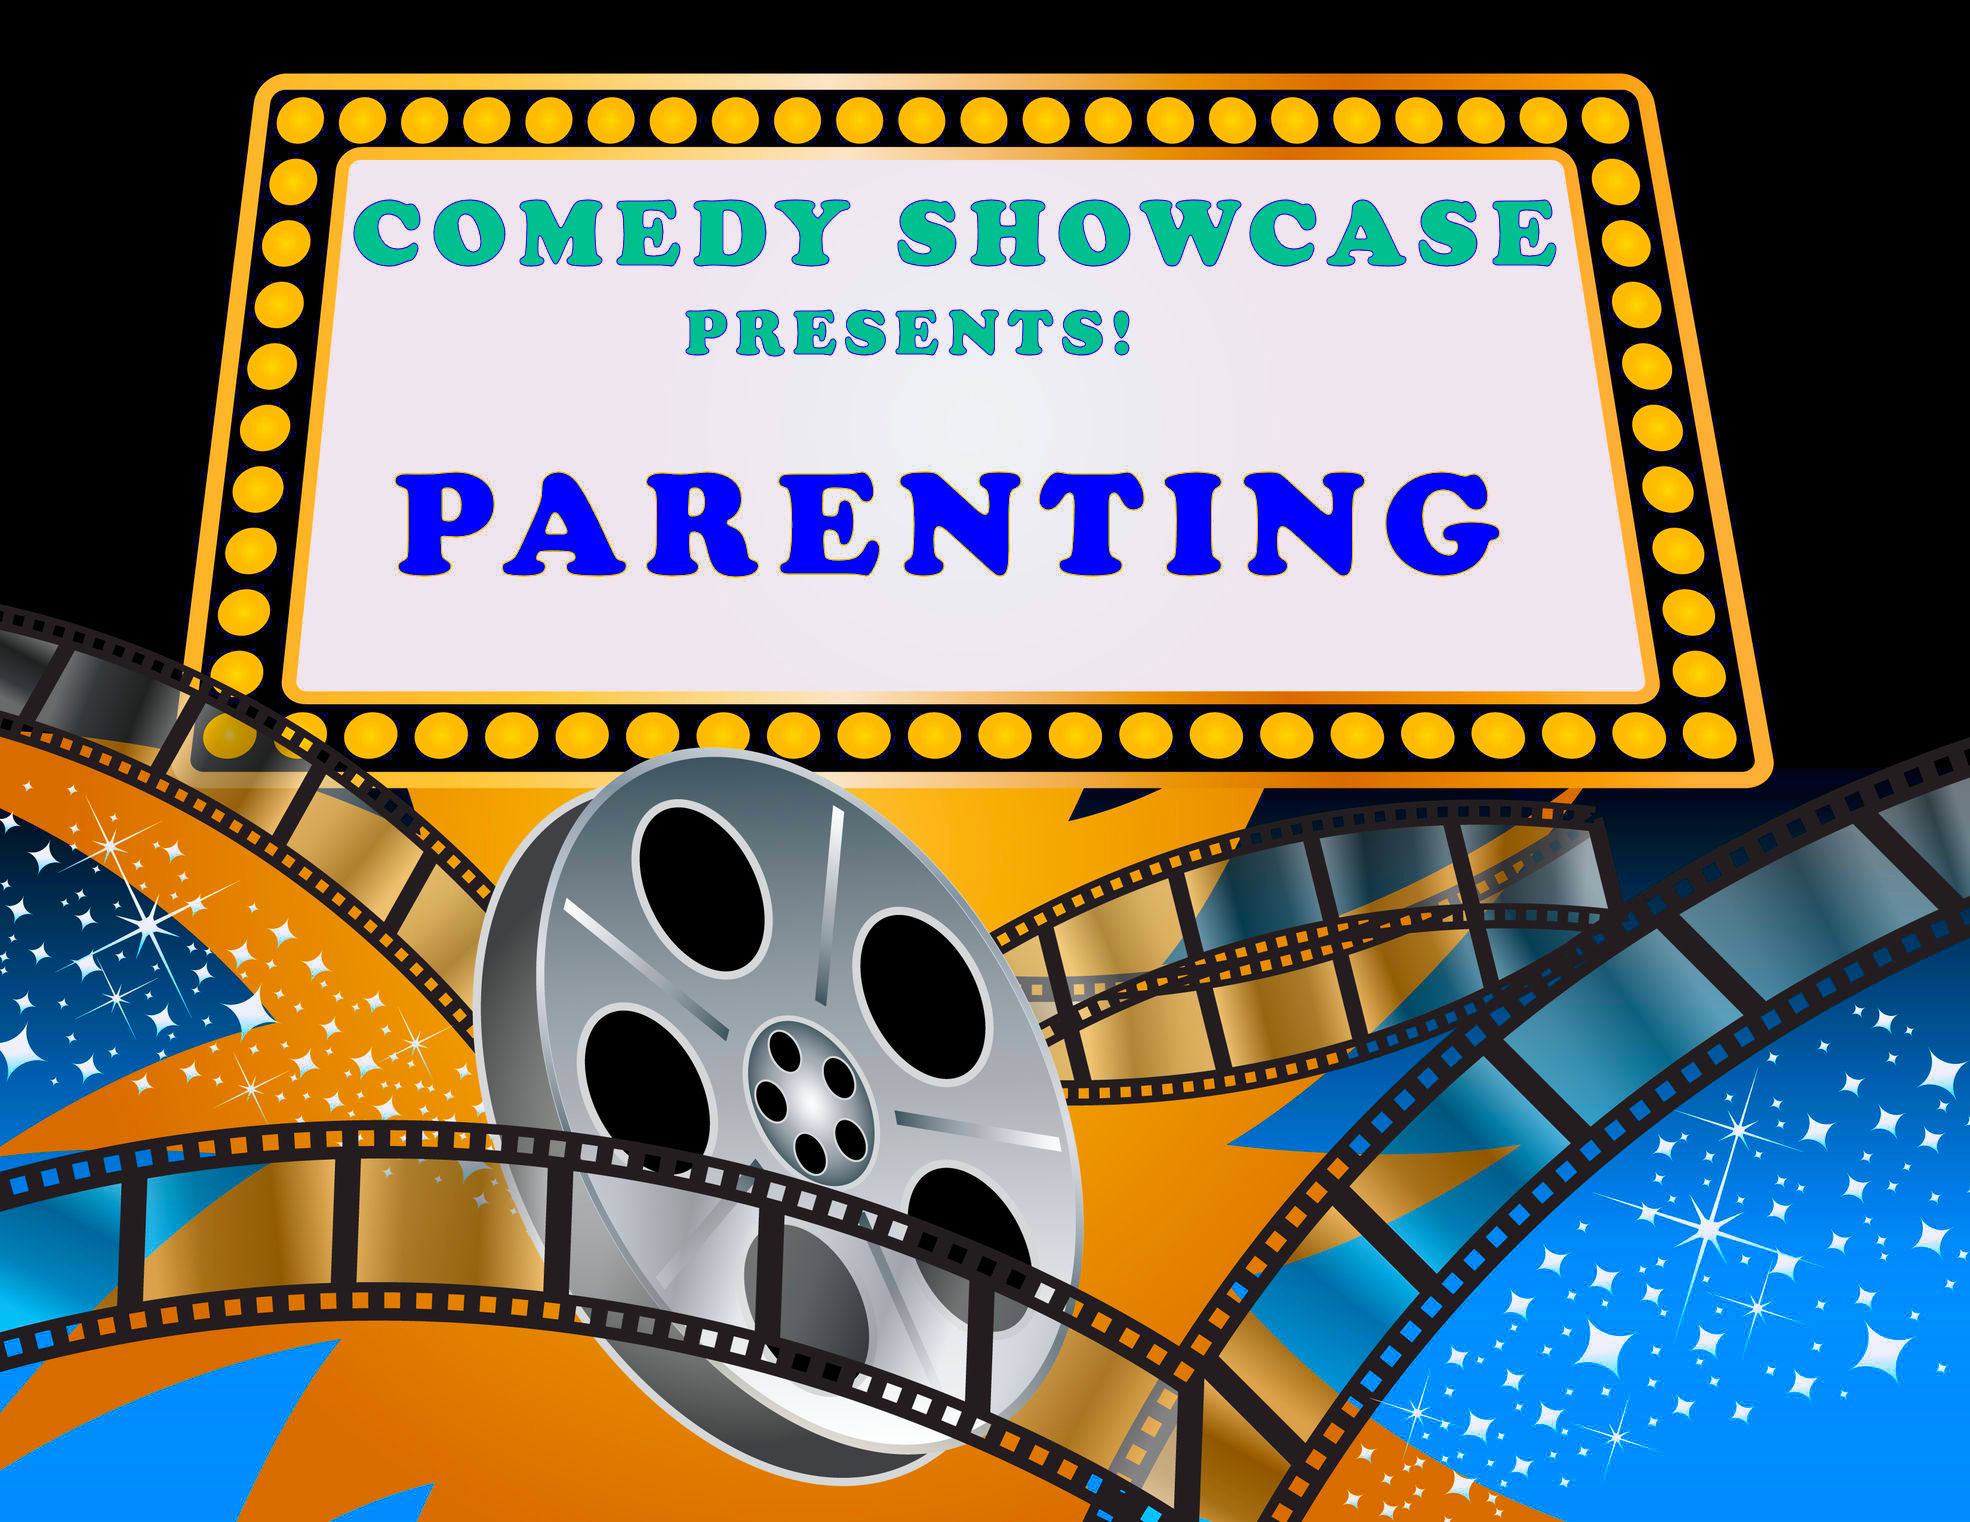 The Best Comedy on the Planet- Parenting